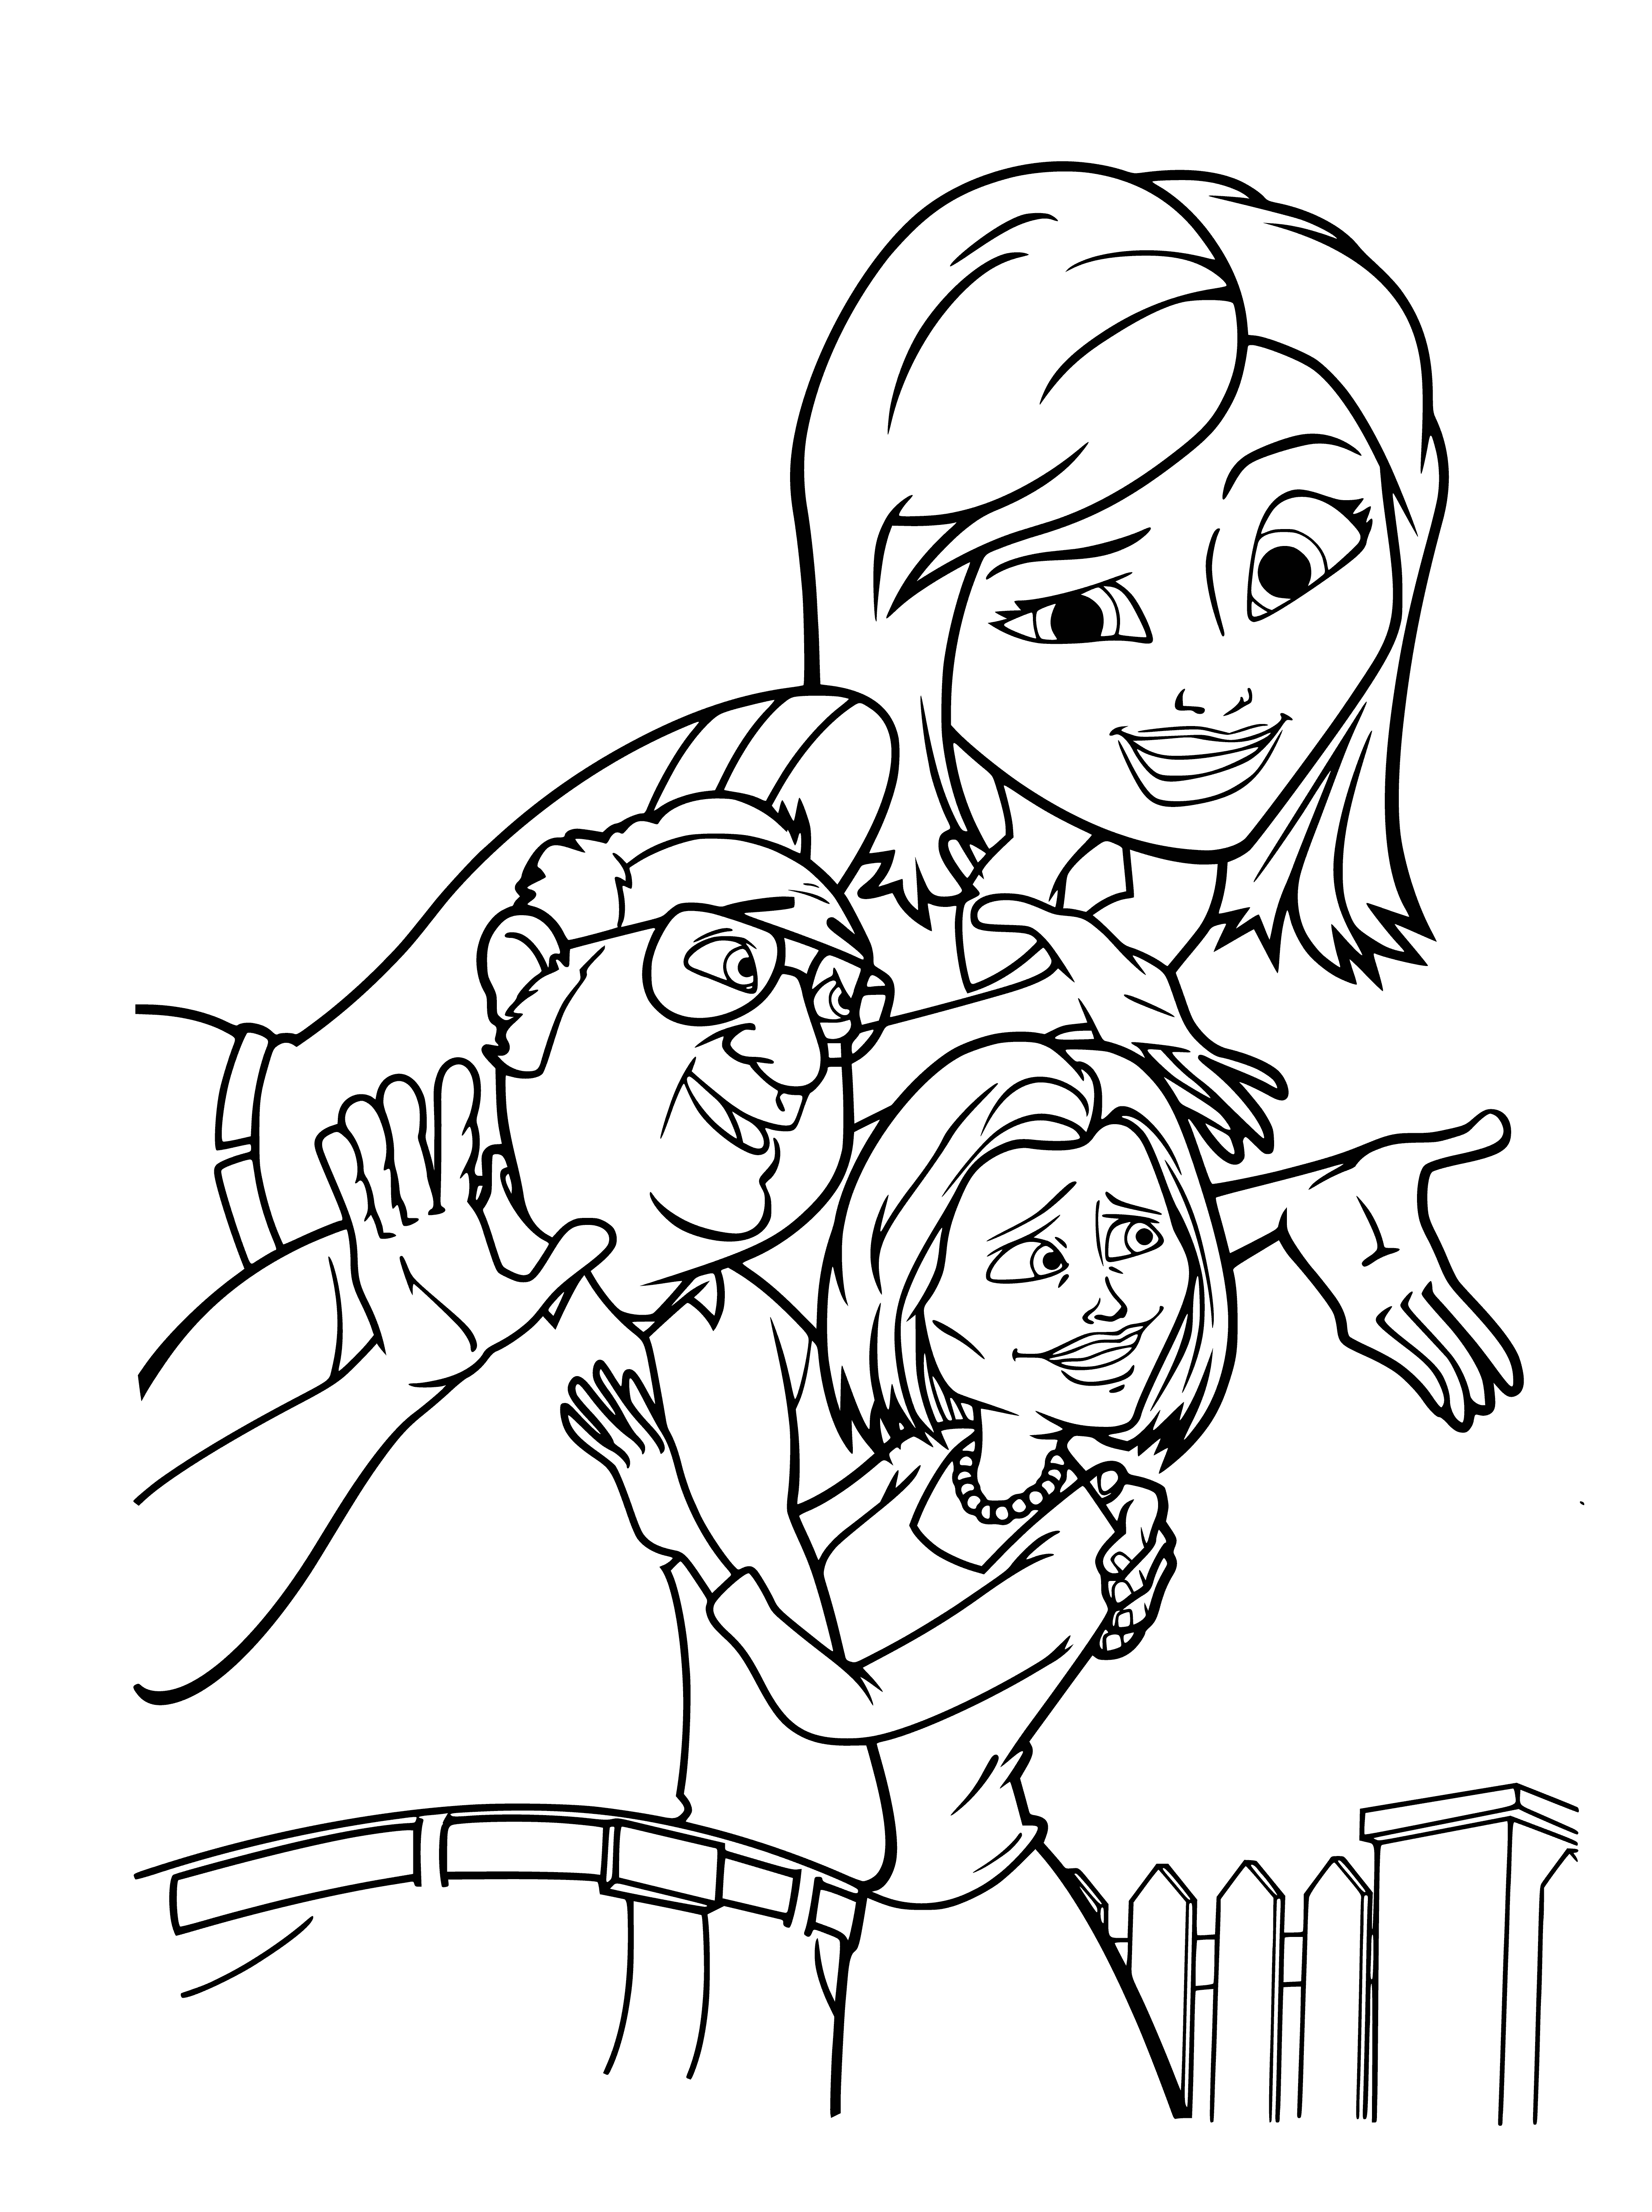 coloring page: Parents' physical features: short, large head; mom blonde, dad brown, both green eyes. Dad red shirt, mom white. #family